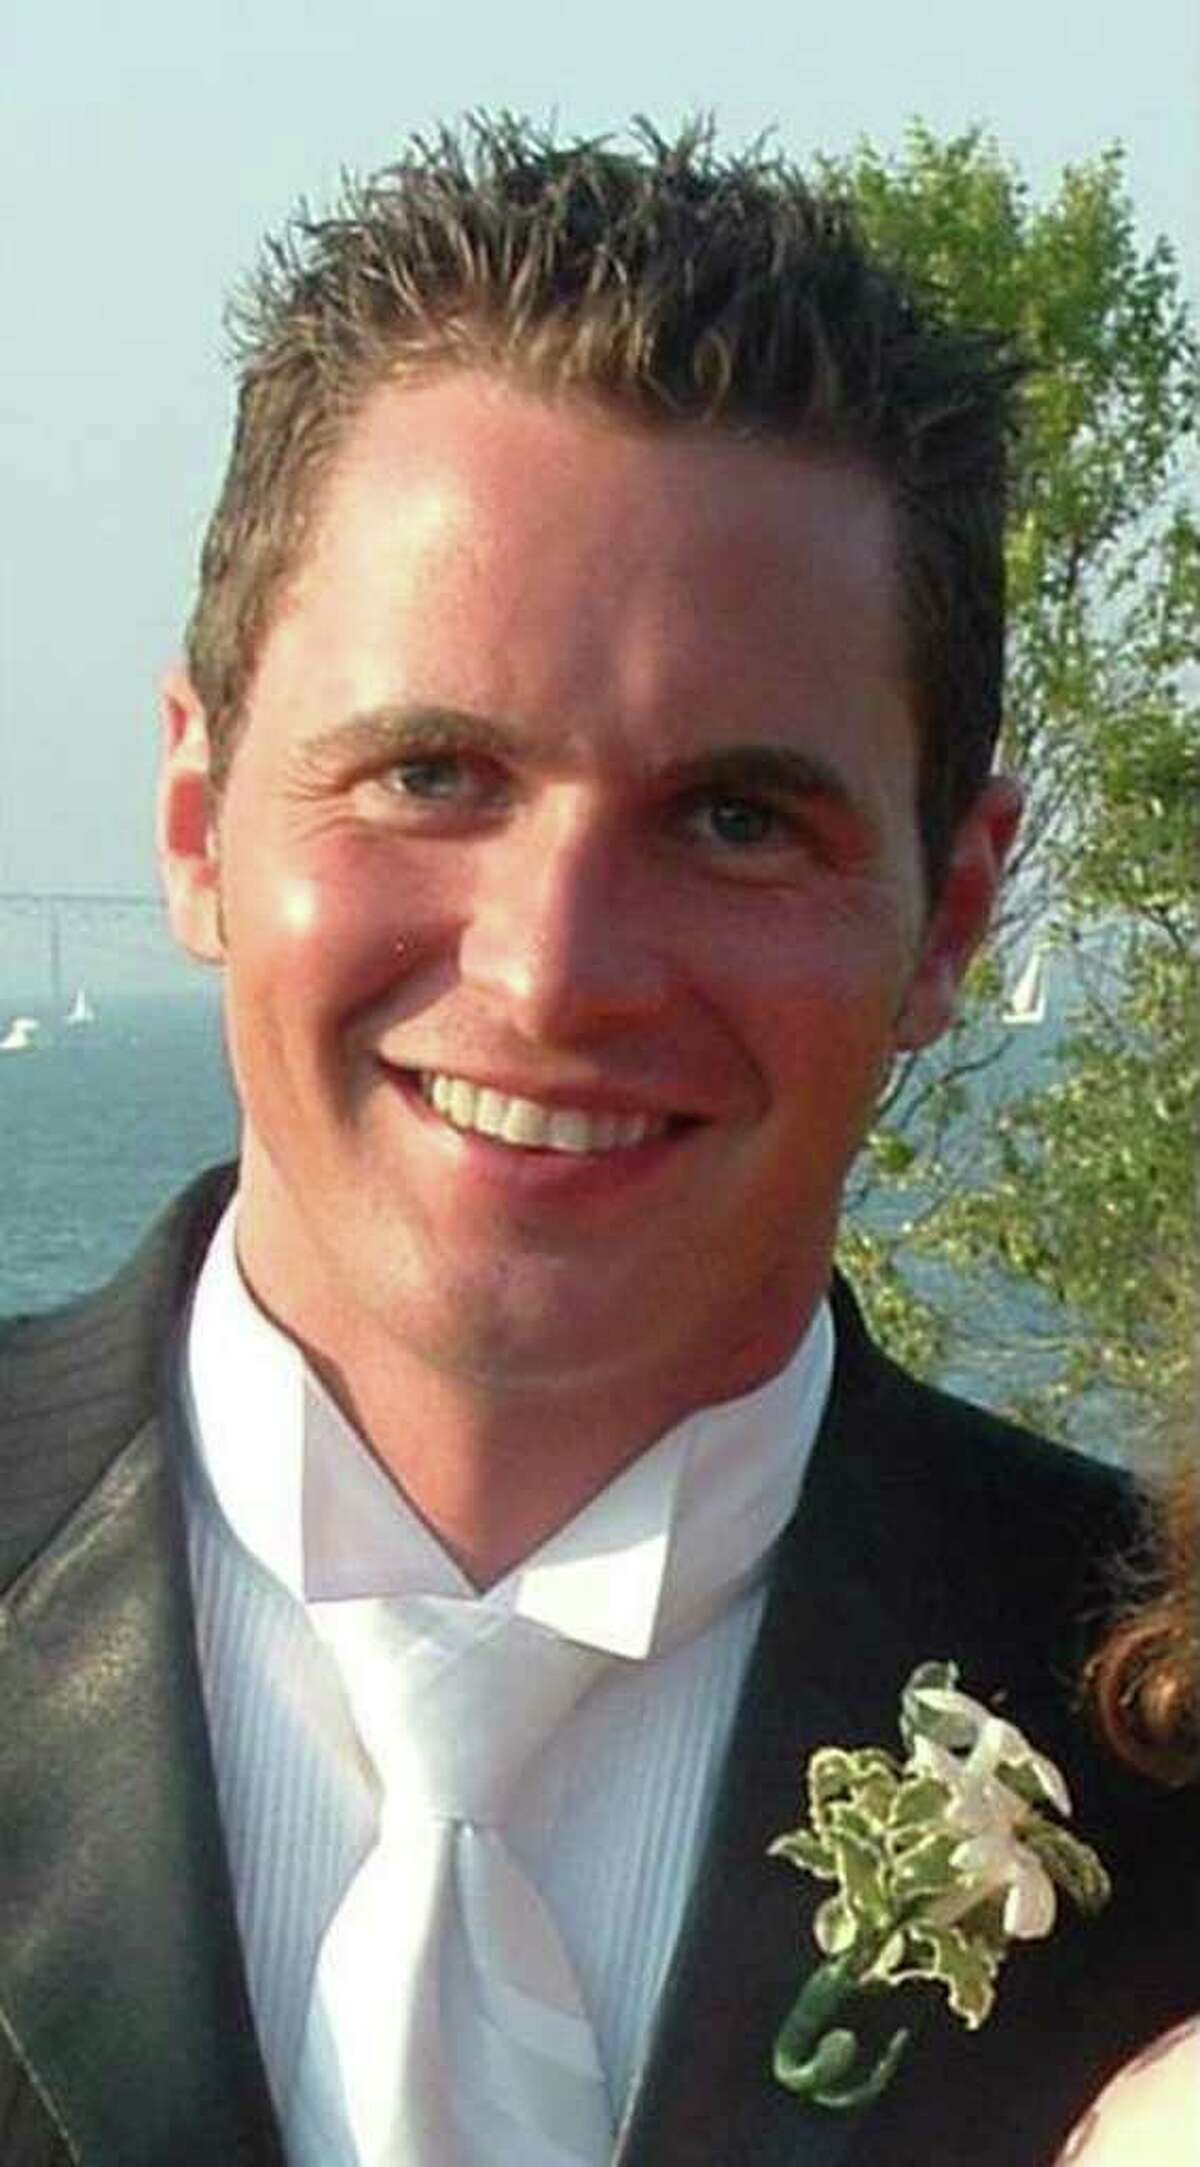 George Smith IV, the Greenwich man who disappeared while on his honeymoon cruise in the Aegean Sea in 2005.